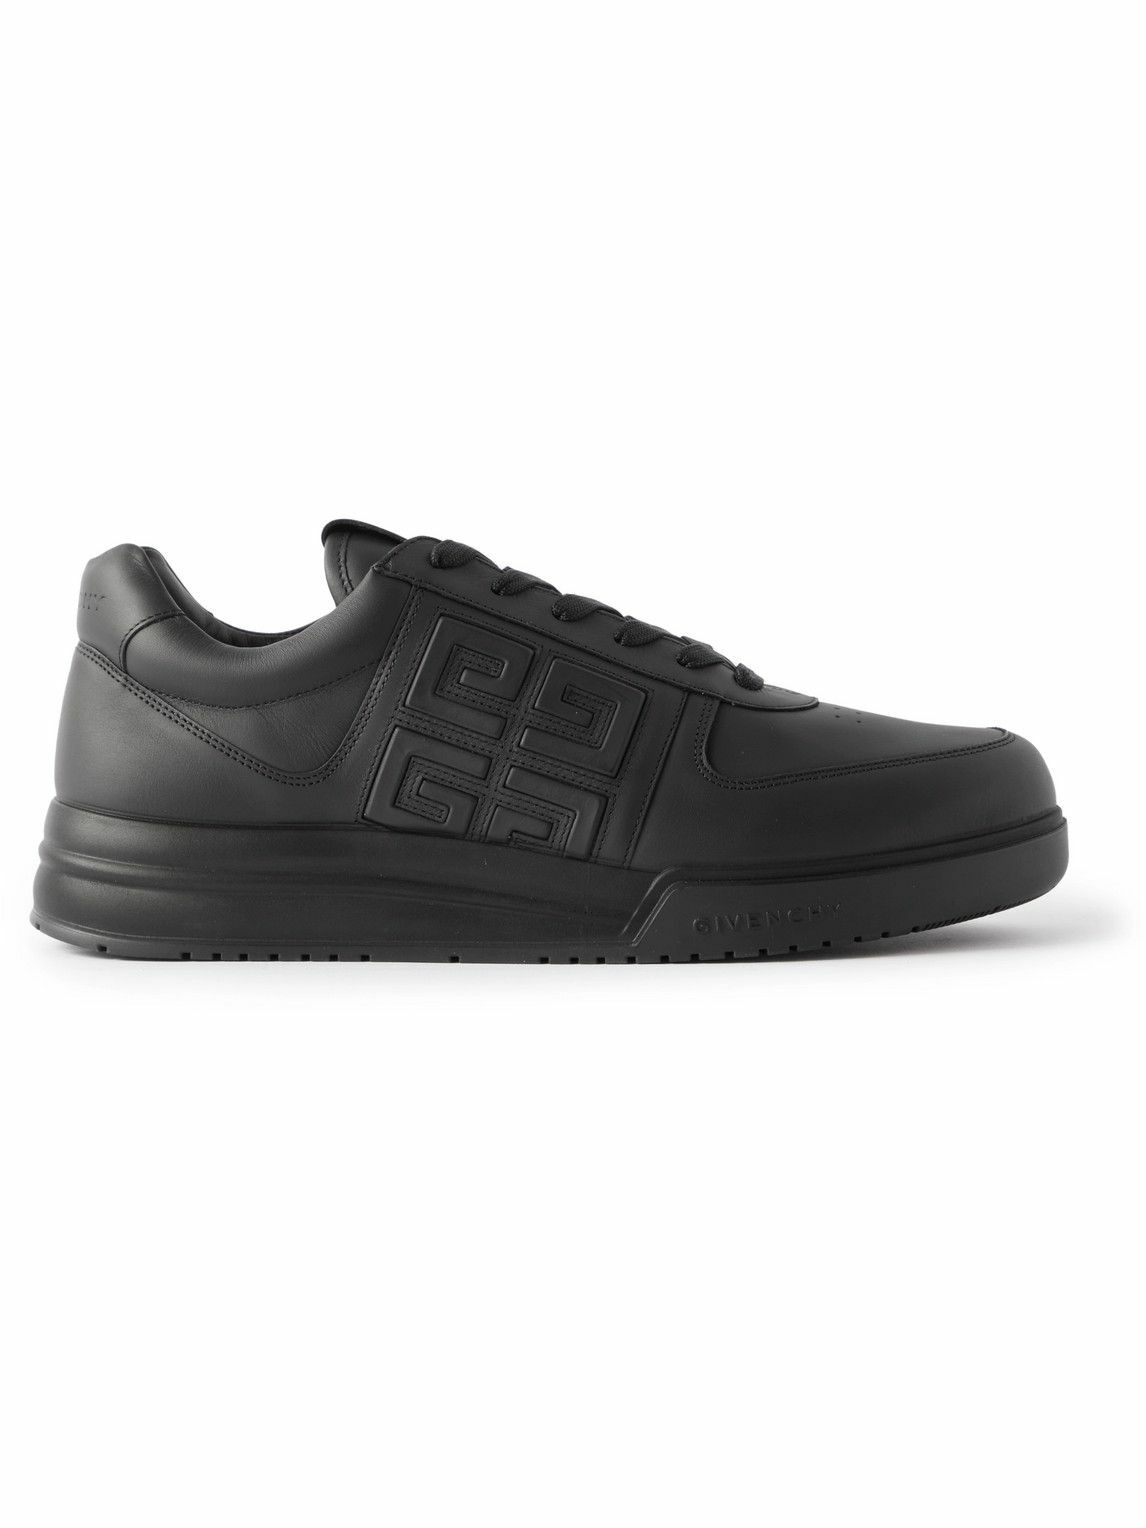 Photo: Givenchy - G4 Logo-Embossed Leather Sneakers - Black